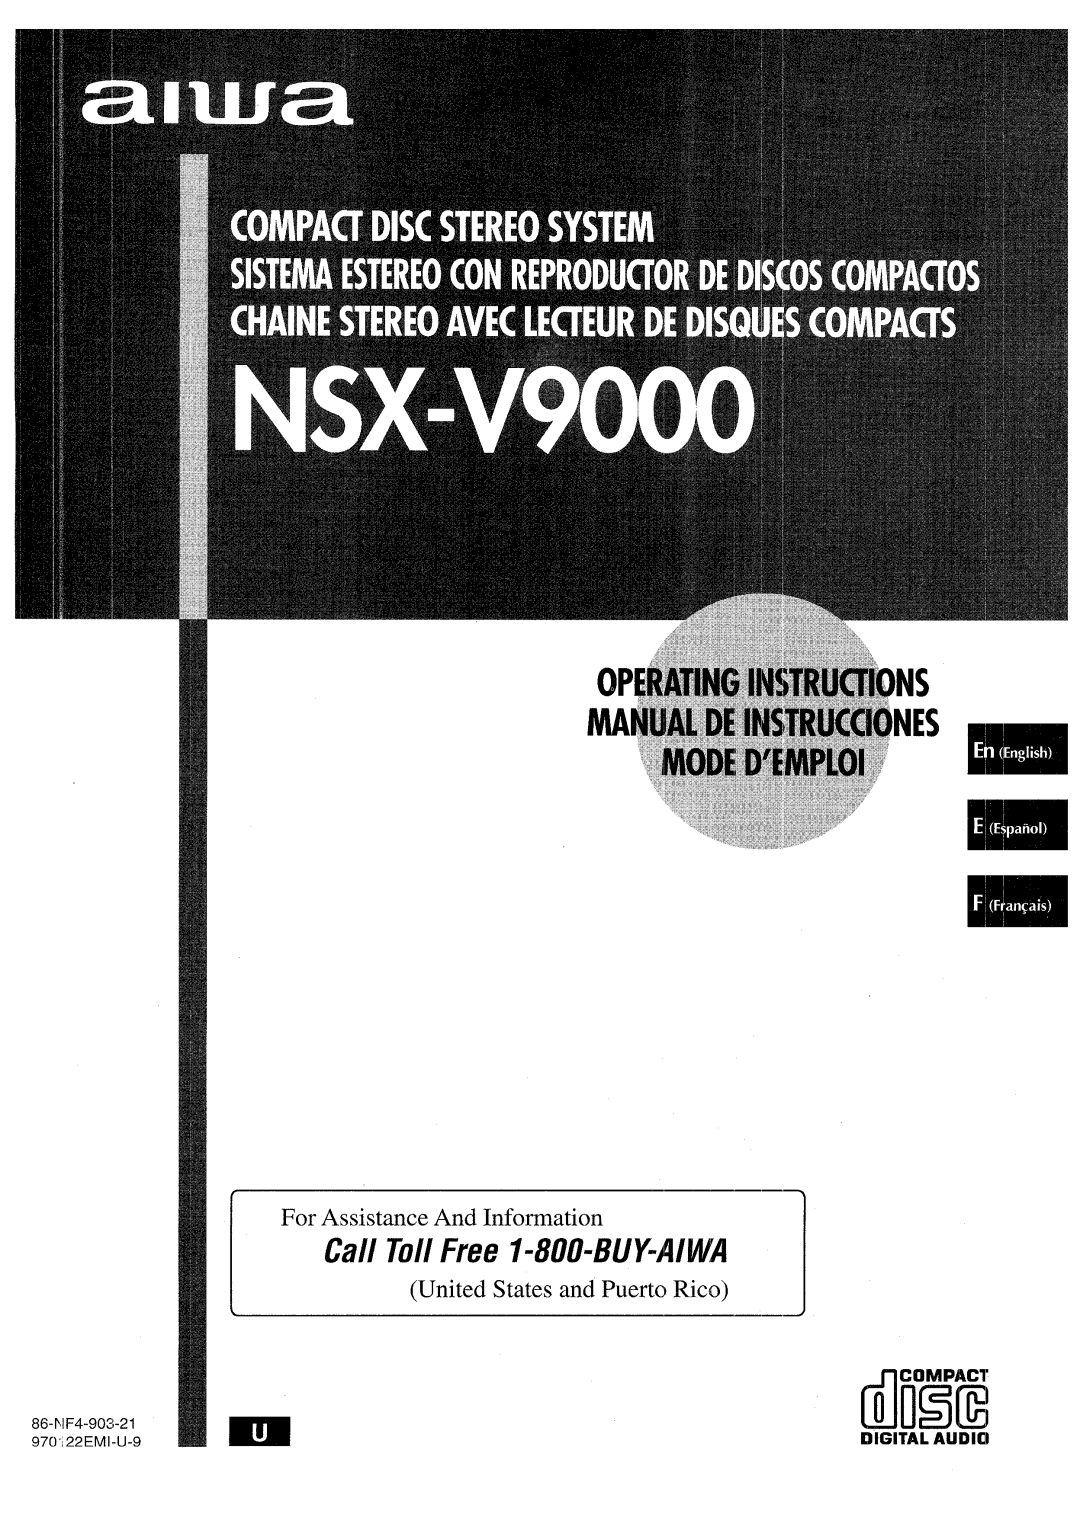 Aiwa NSX-V9000 manual dliT!E, Call Toll Free l-8110-BUY-AIWA, For Assistance And Information 